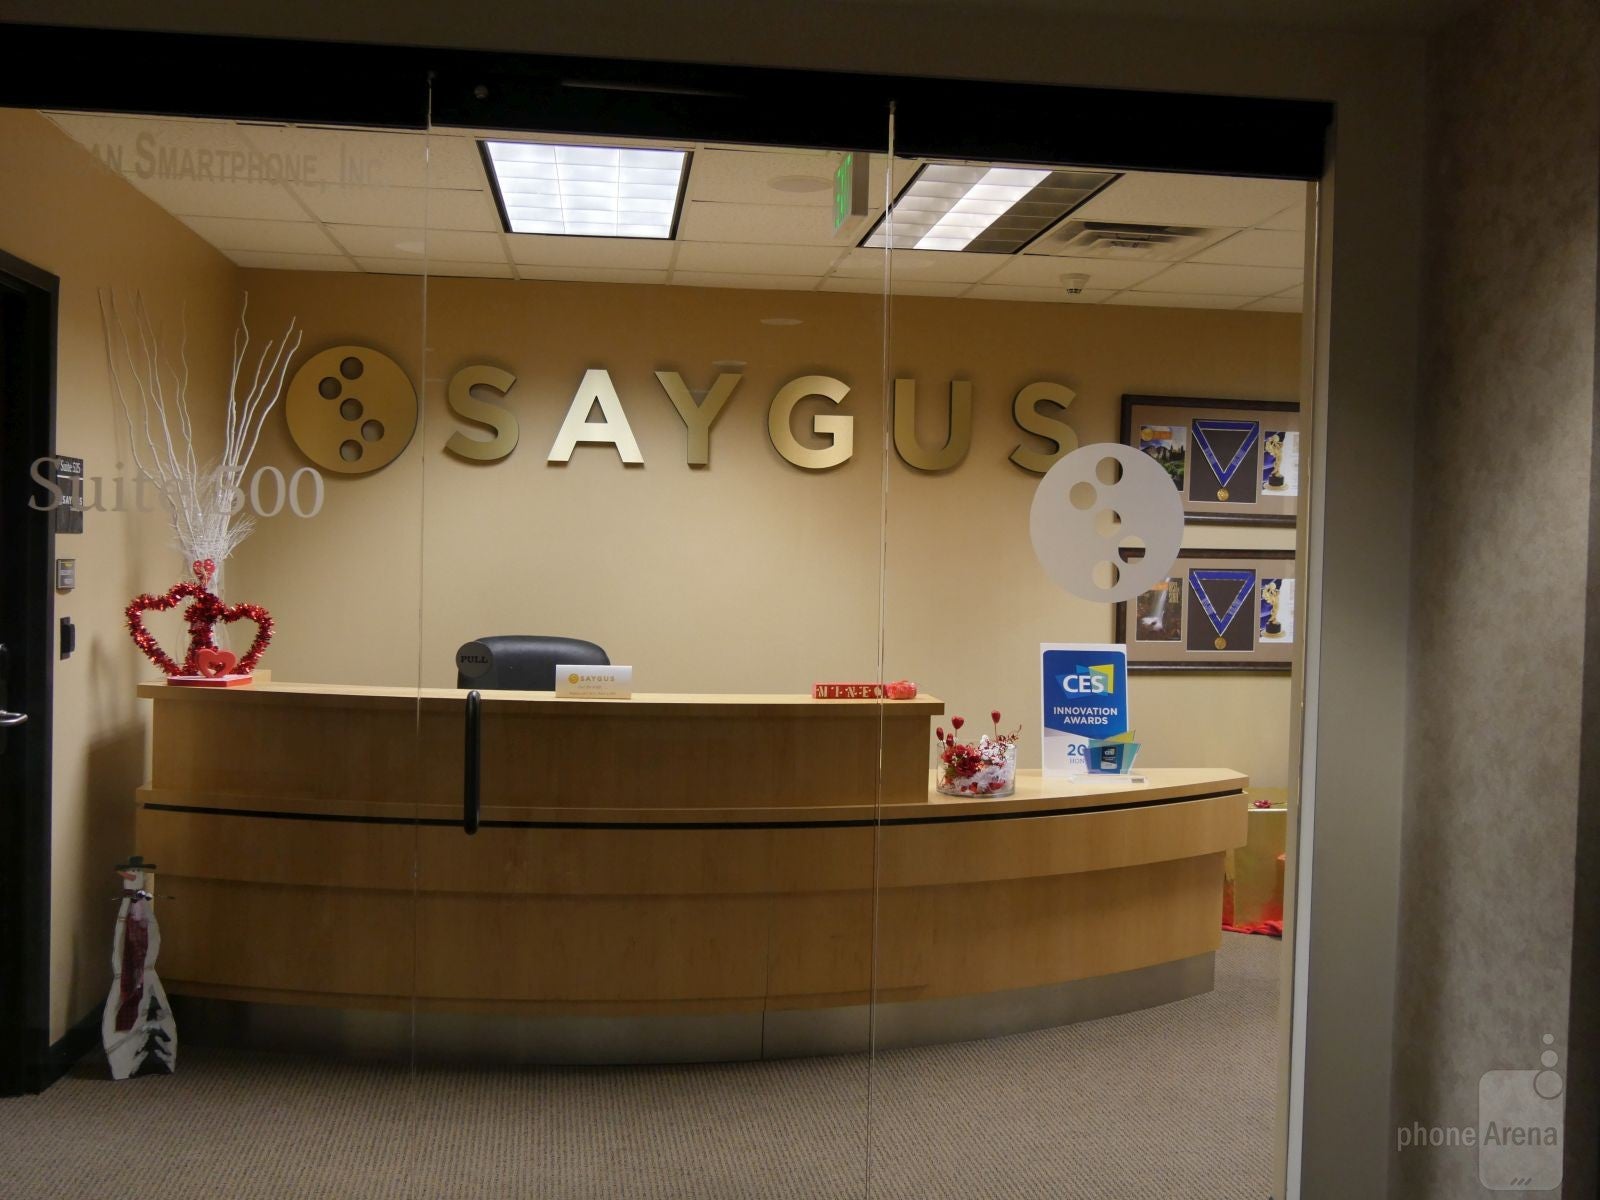 After lunch and the middle of the work week, an empty receptionist desk greeted me. Was Saygus open for business? Yes, although a beehive of activity, the offices were not. - Remember Saygus? We got an exclusive sit-down with founder and CEO Chad Sayers